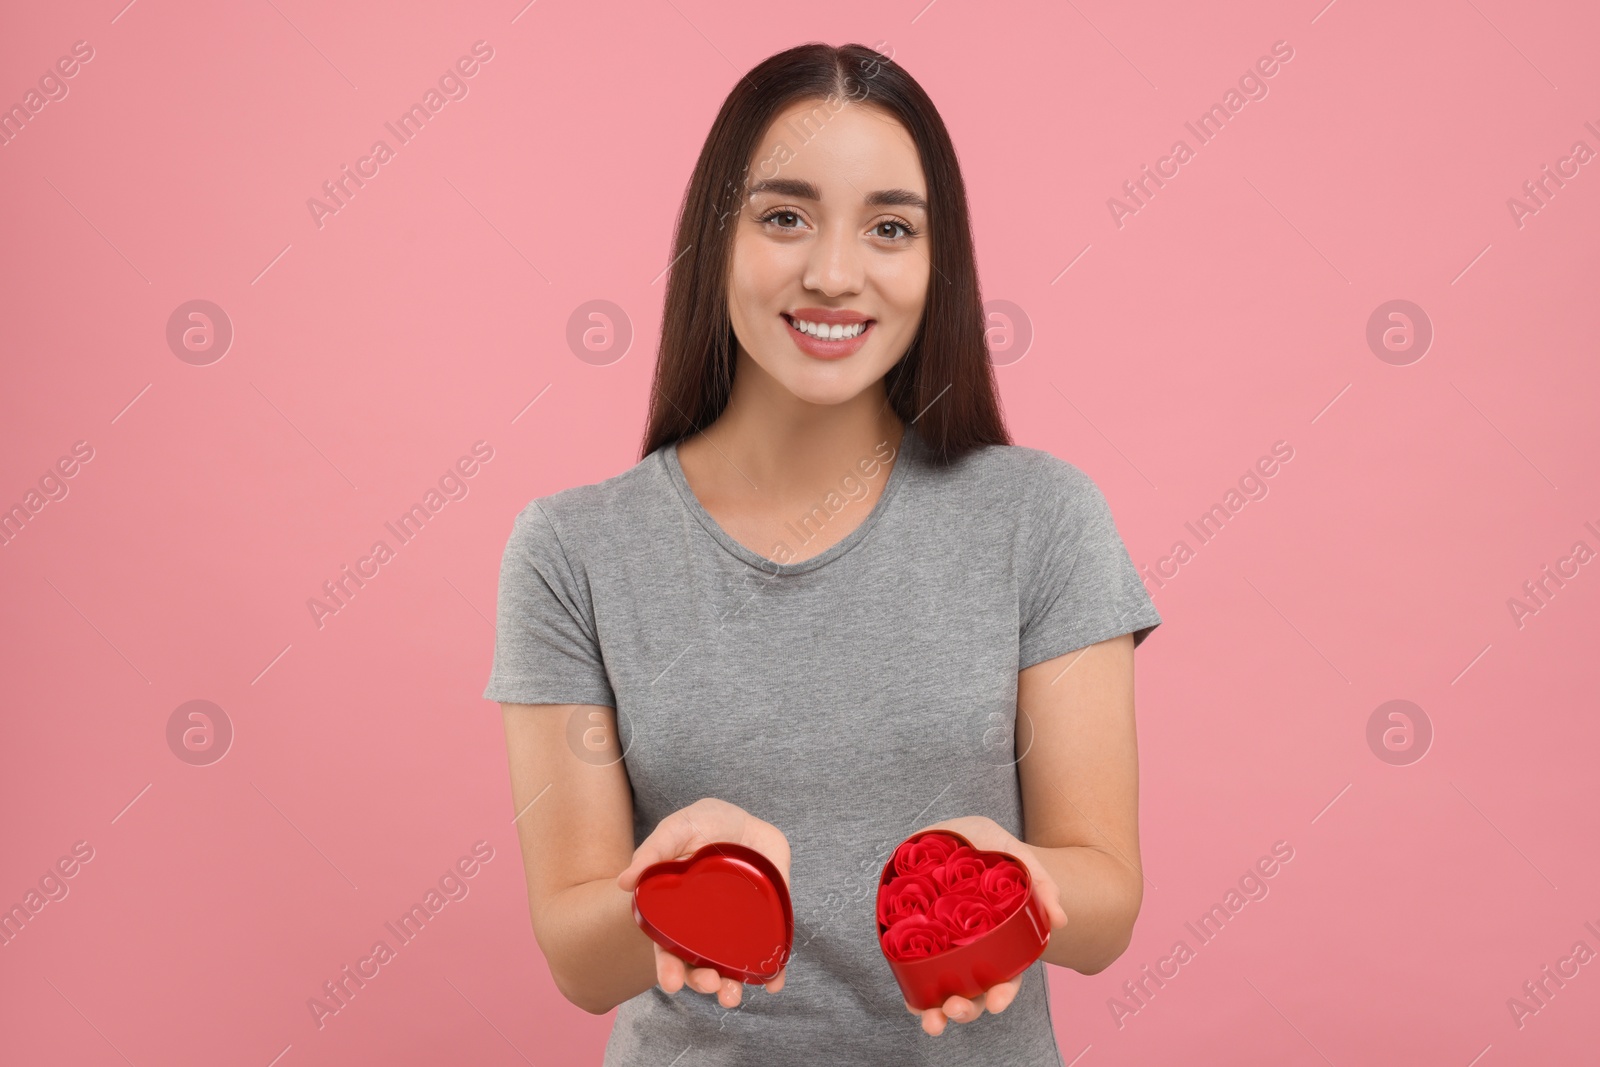 Photo of Happy young woman holding red heart shaped gift box on pink background